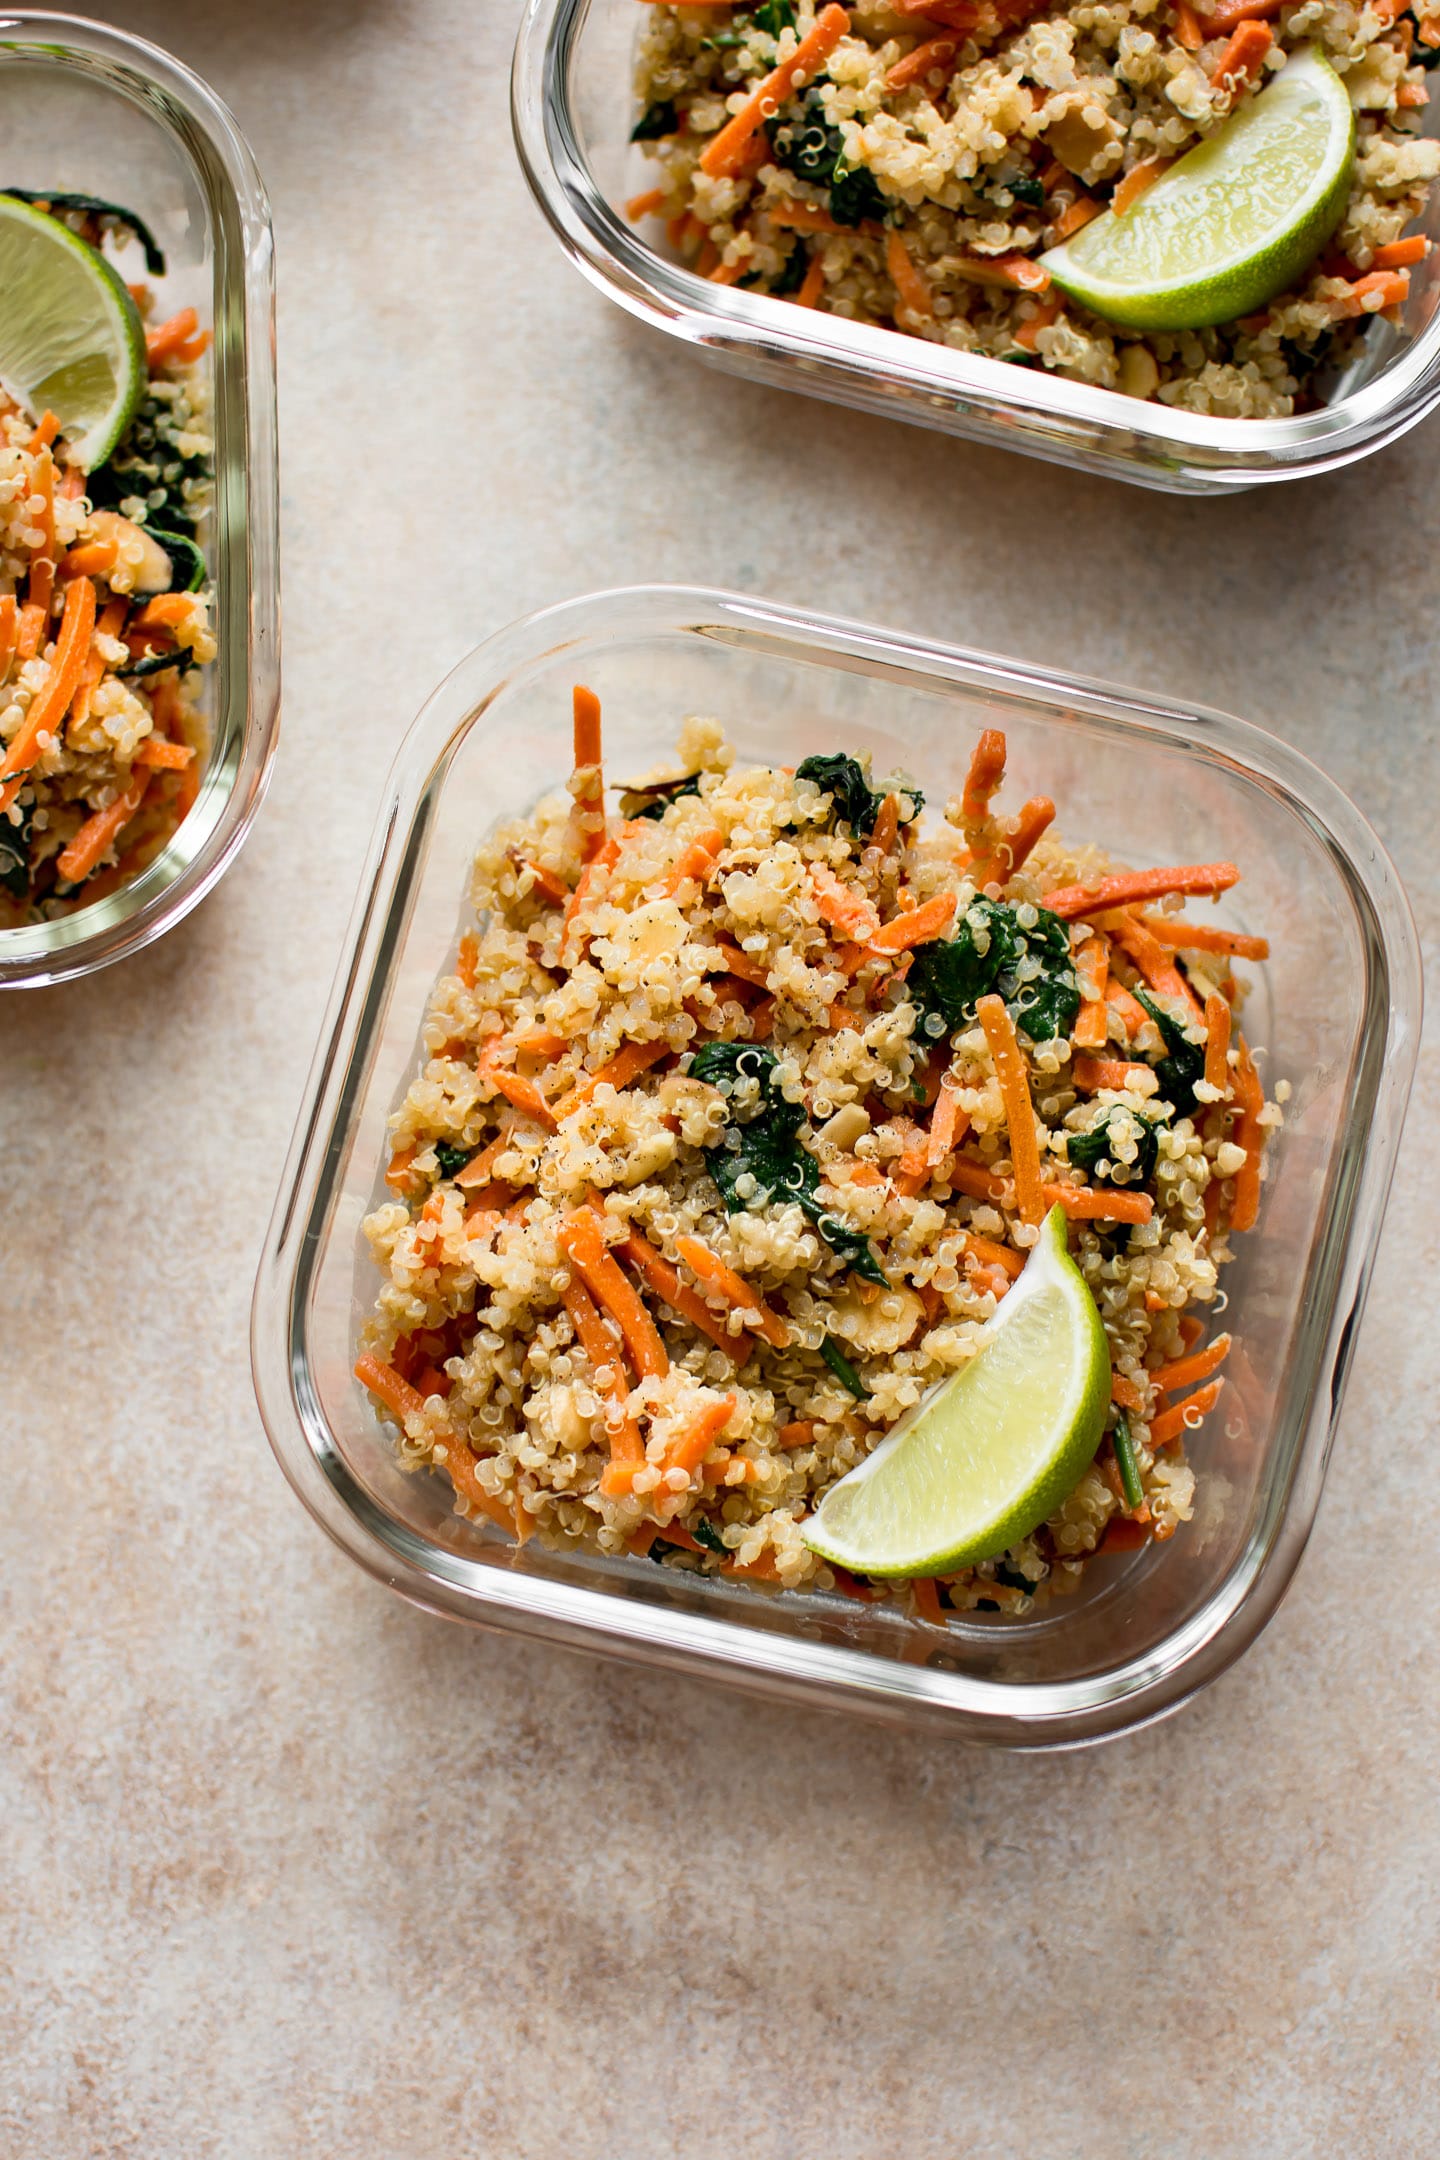 Spinach and Quinoa Vegan Meal Prep Bowls